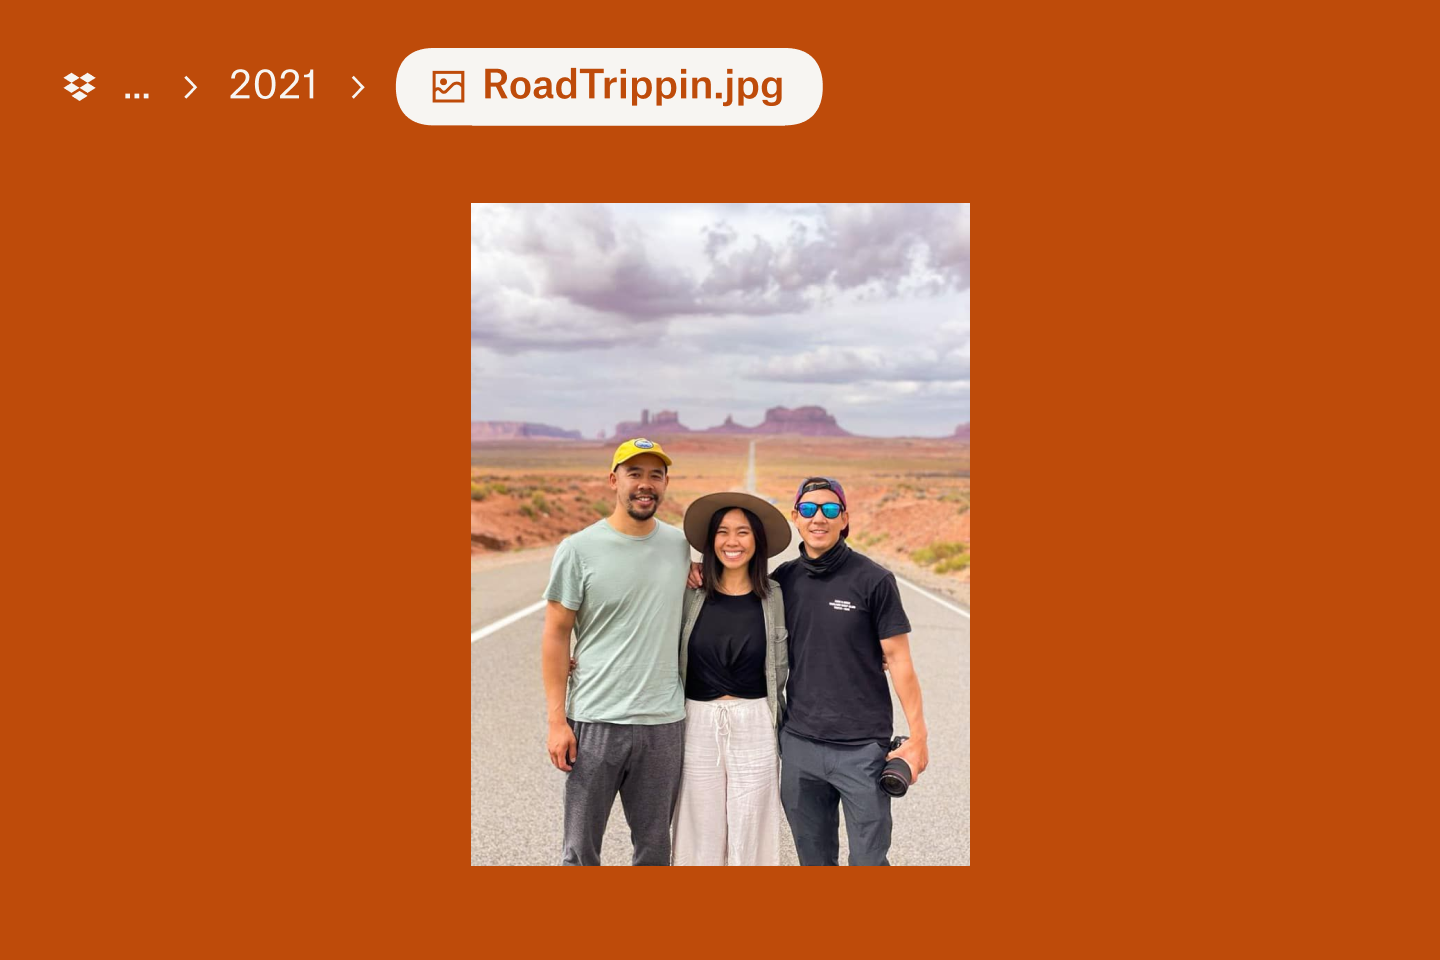 Three people standing in the road surrounded by the Arizona desert landscape